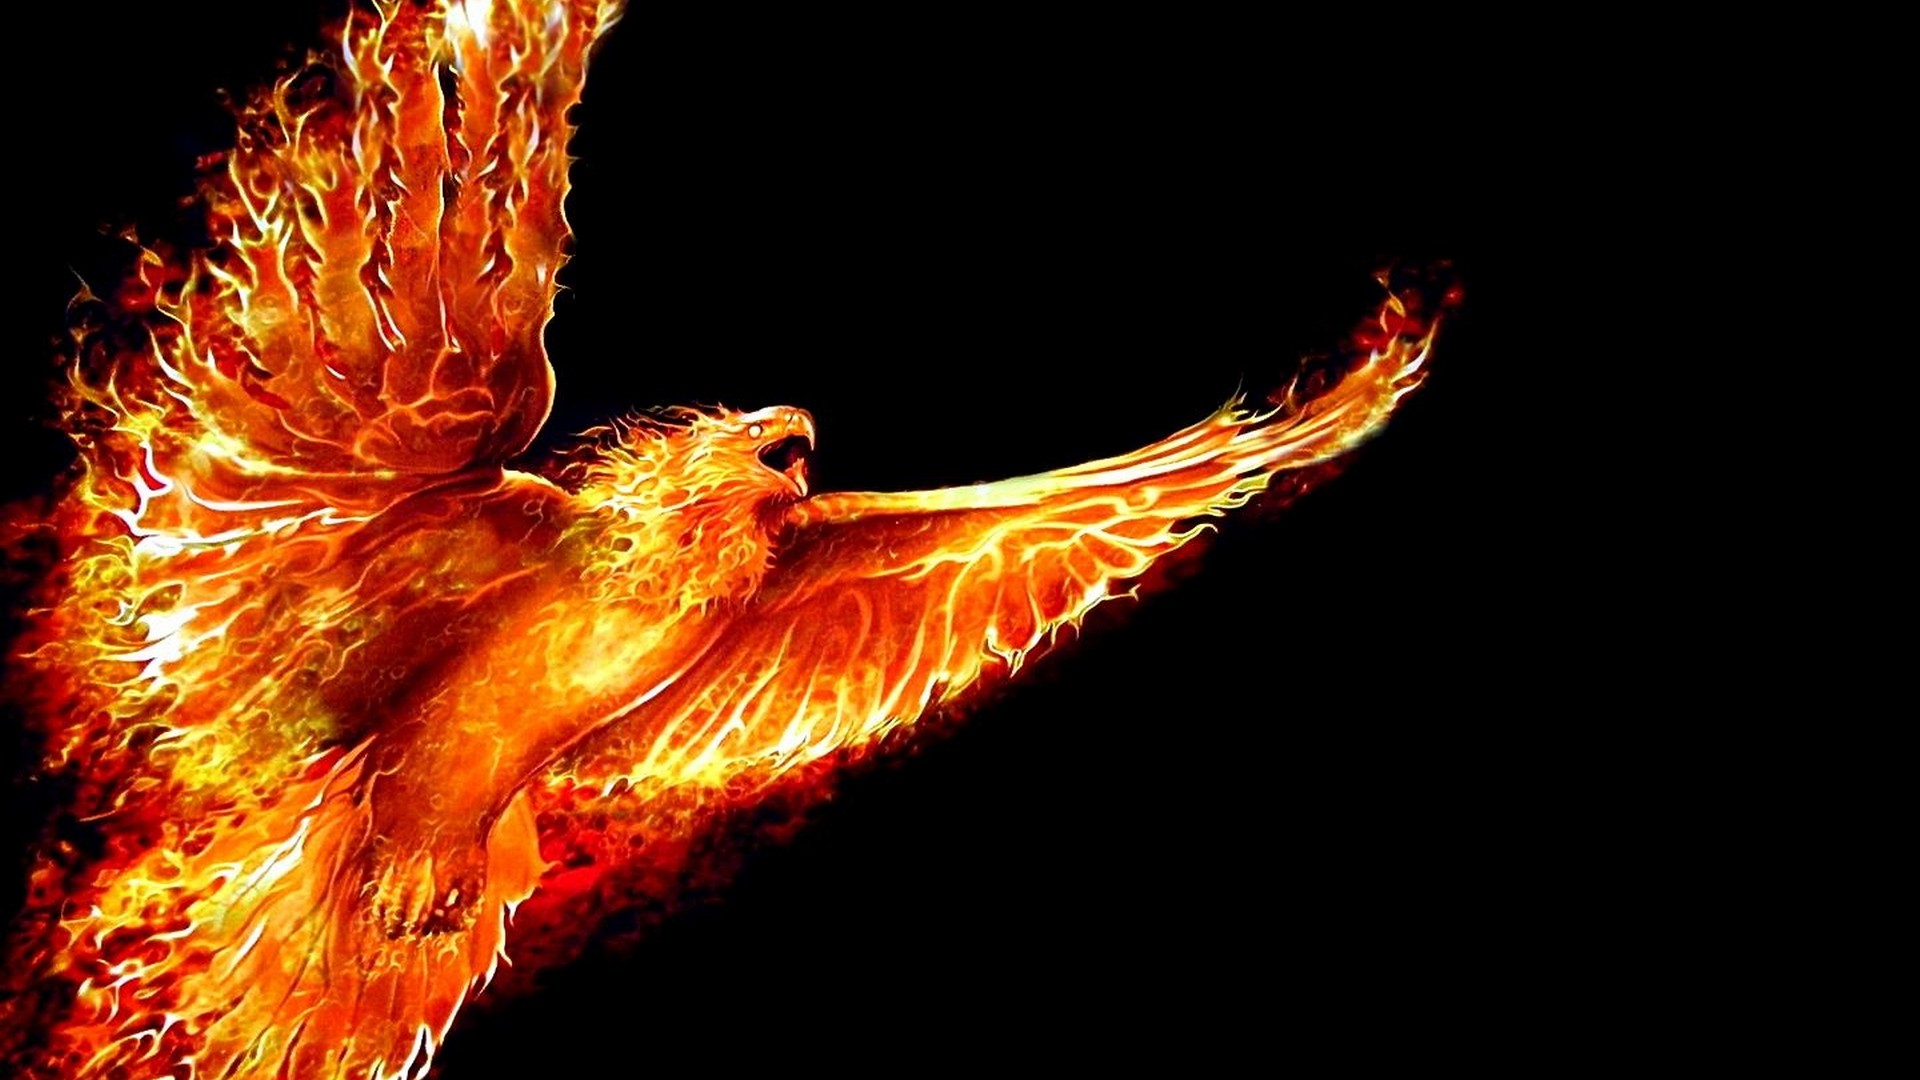 Phoenix Background Wallpaper HD with image resolution 1920x1080 pixel. You can make this wallpaper for your Desktop Computer Backgrounds, Mac Wallpapers, Android Lock screen or iPhone Screensavers